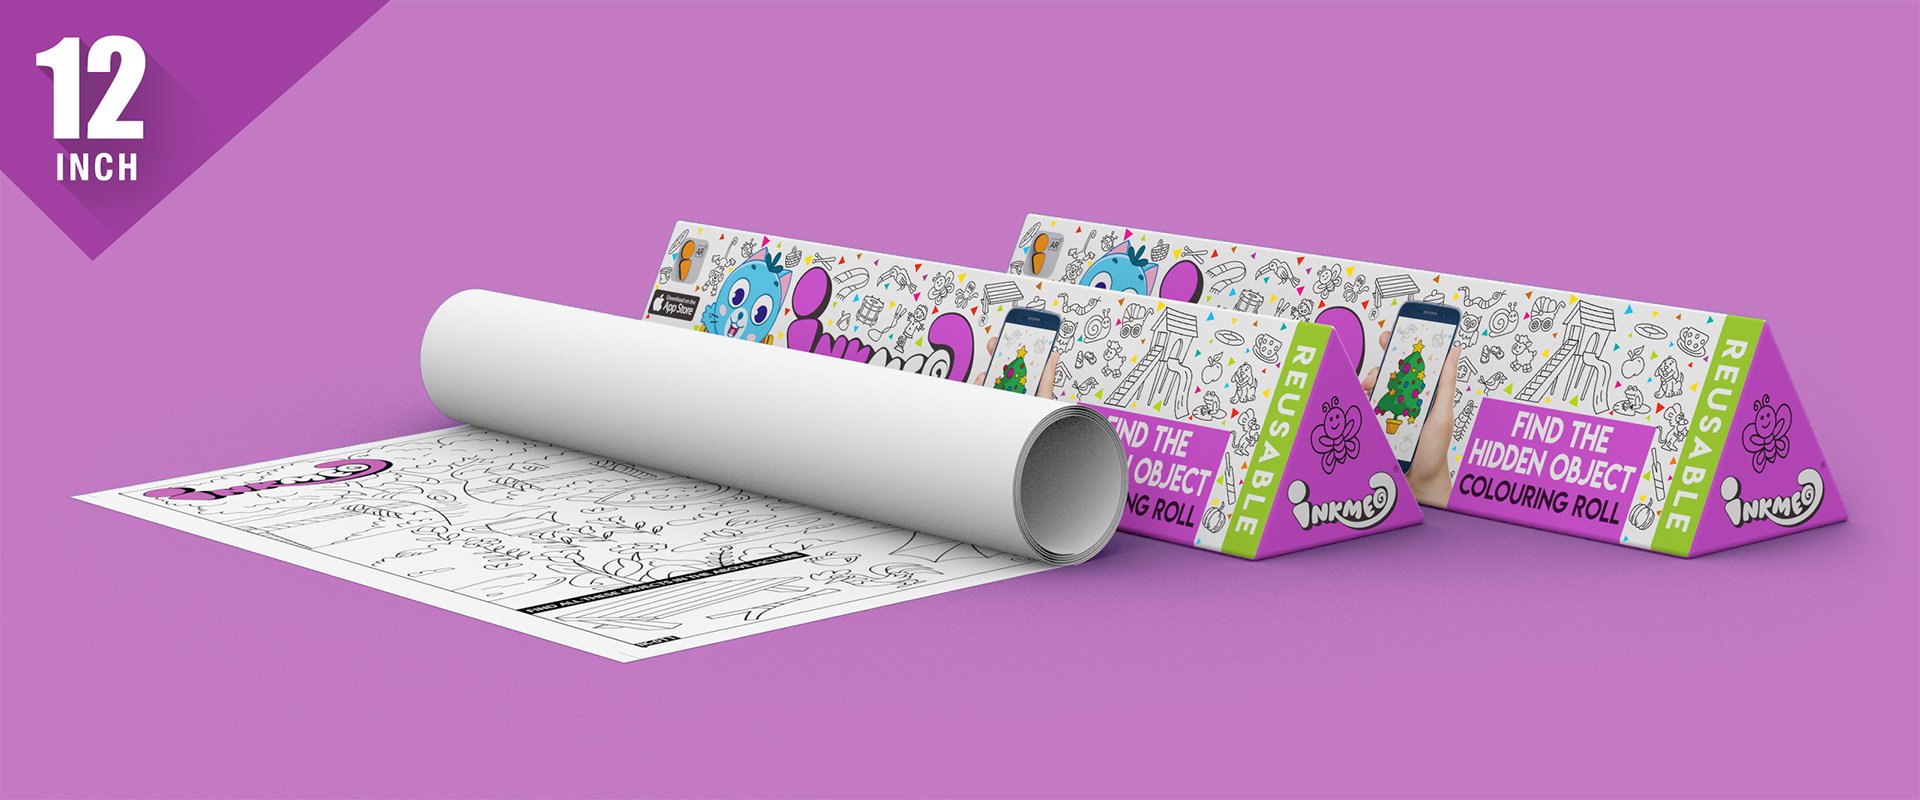 Find the Hidden Object Colouring Roll (12 inch) - Inkmeo